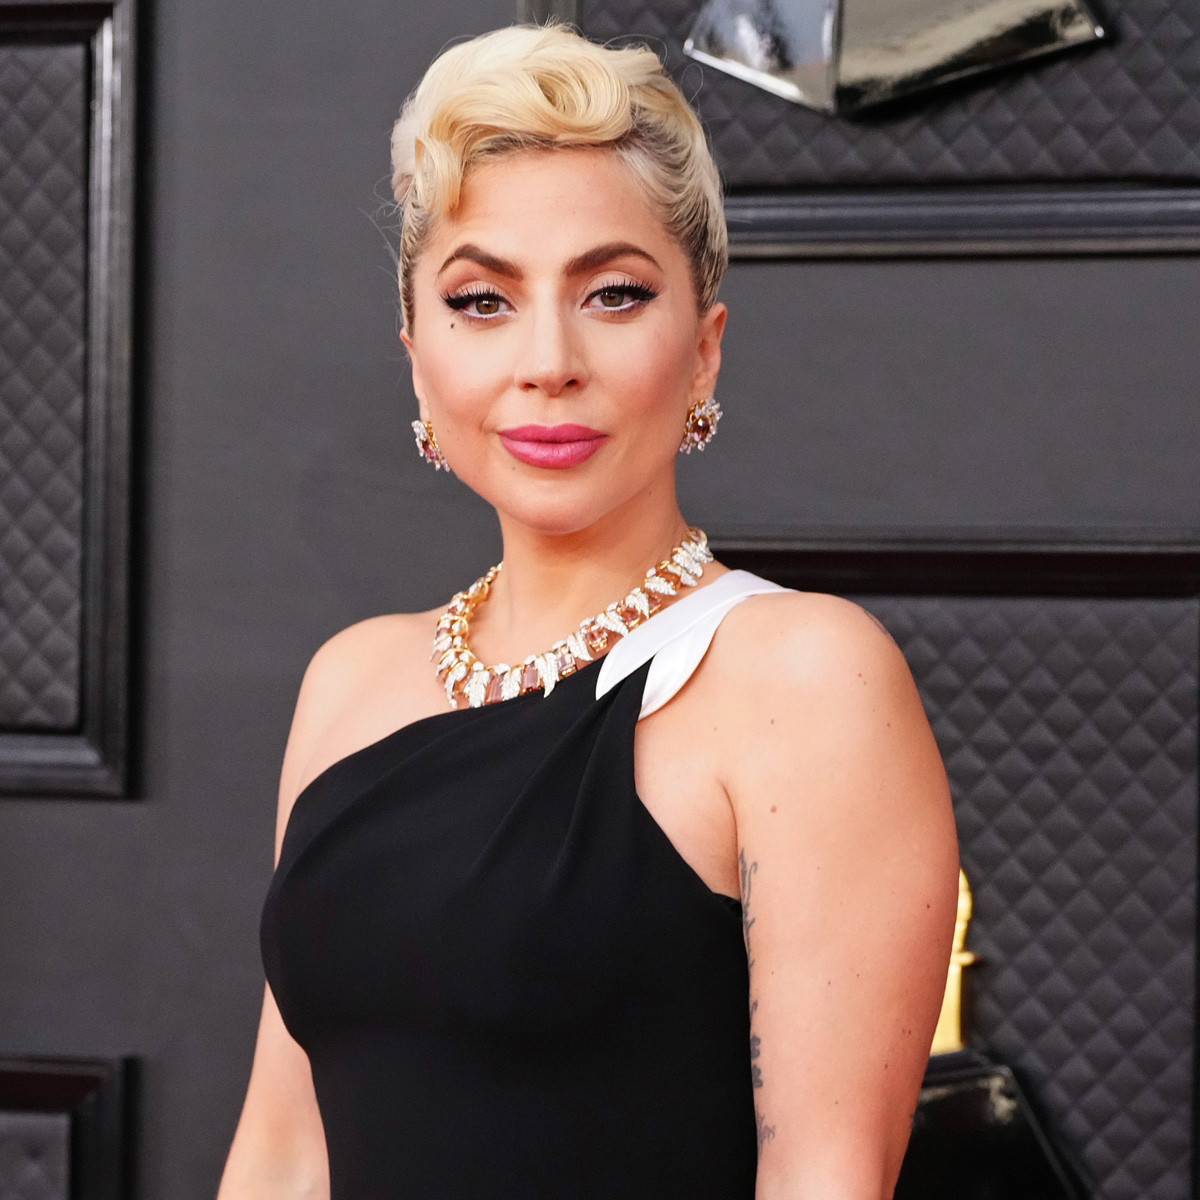 Lady Gaga Shares Update on Why She's Been “So Private” Lately